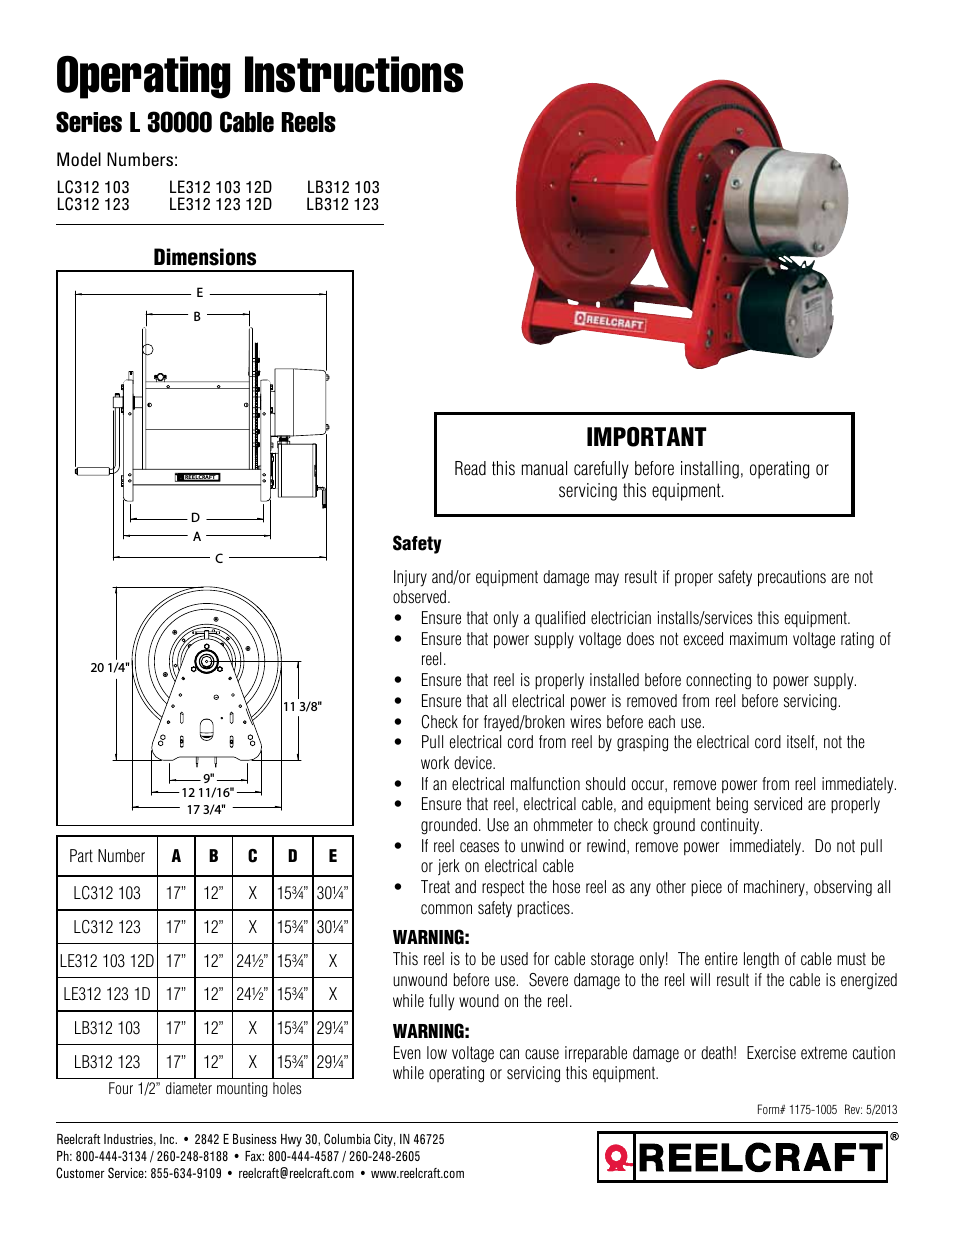 Series L30000 Cable Reels